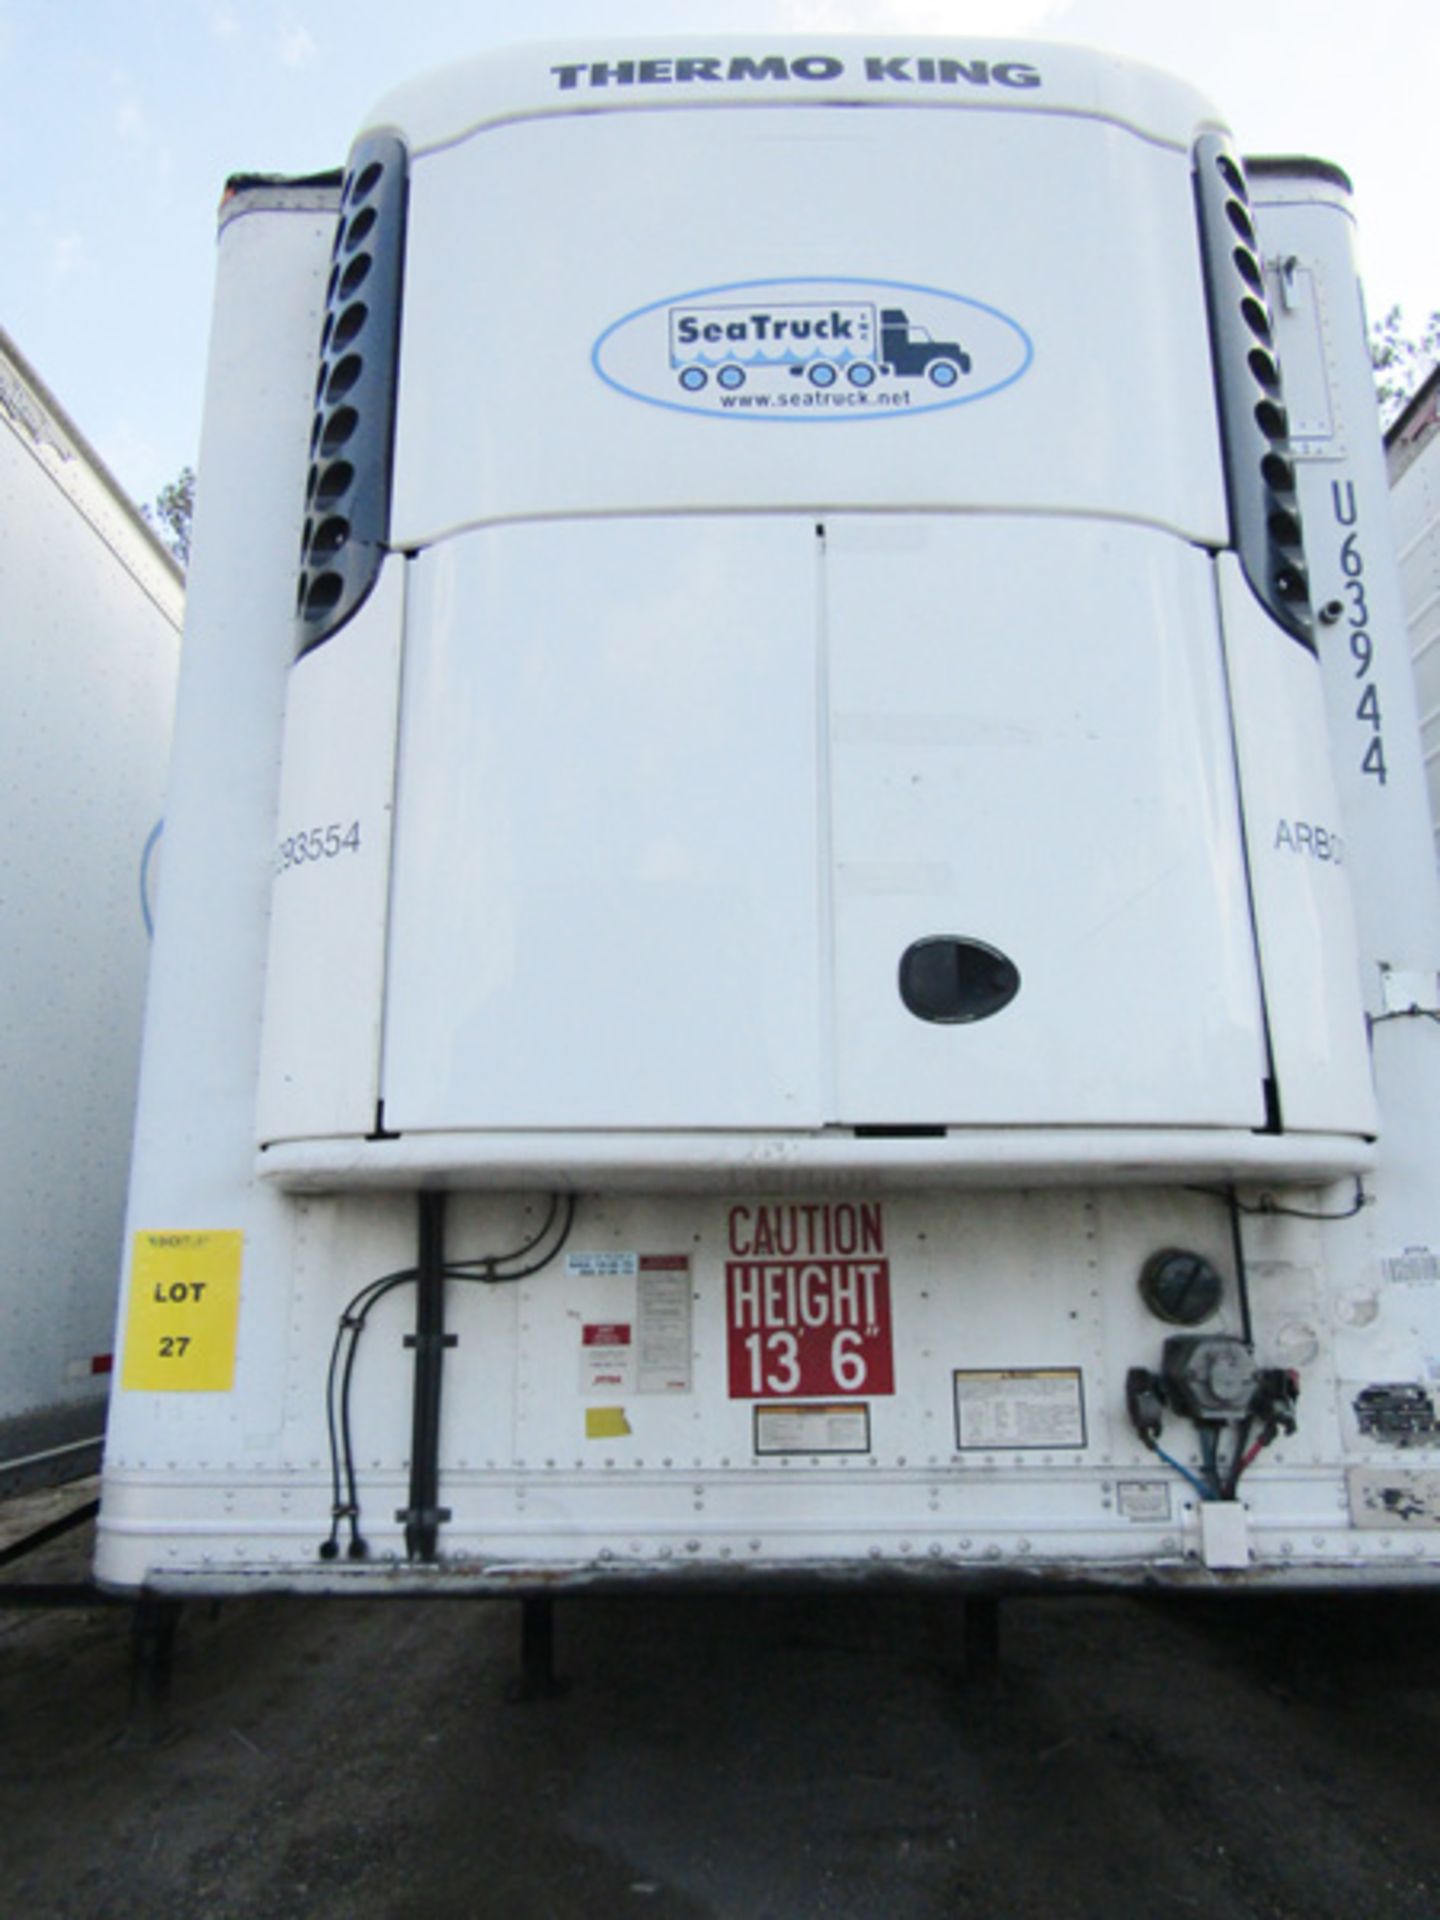 2008 Great Dane 53' Refrigerated Trailer Vin# 1GRAA06258S700628 Thermo King SB-210 Hours 13128 EQ# - Image 2 of 4